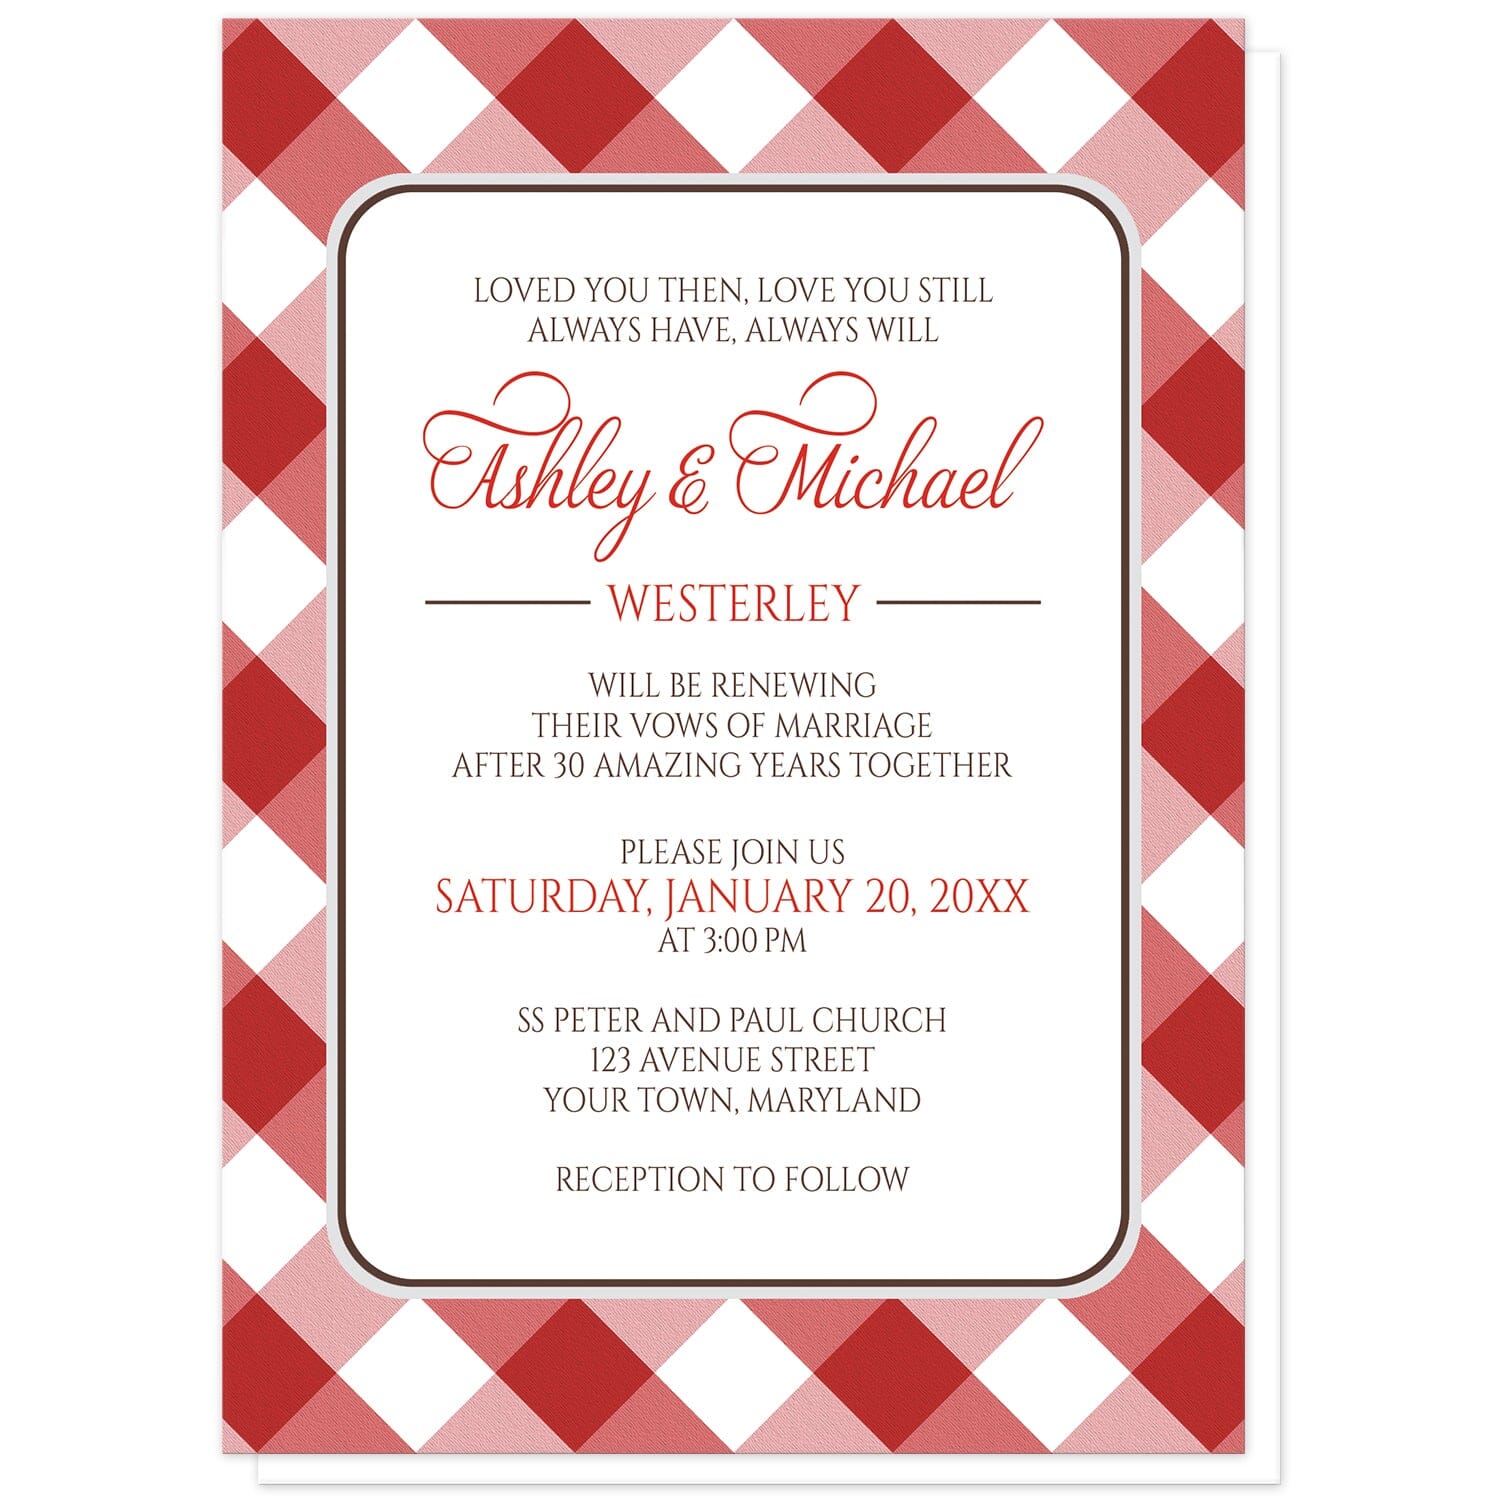 Red Gingham Vow Renewal Invitations at Artistically Invited. Red gingham vow renewal invitations with your personalized ceremony details custom printed in red and brown inside a white rectangular area outlined in brown and light gray. The background design is a diagonal red and white gingham pattern. 